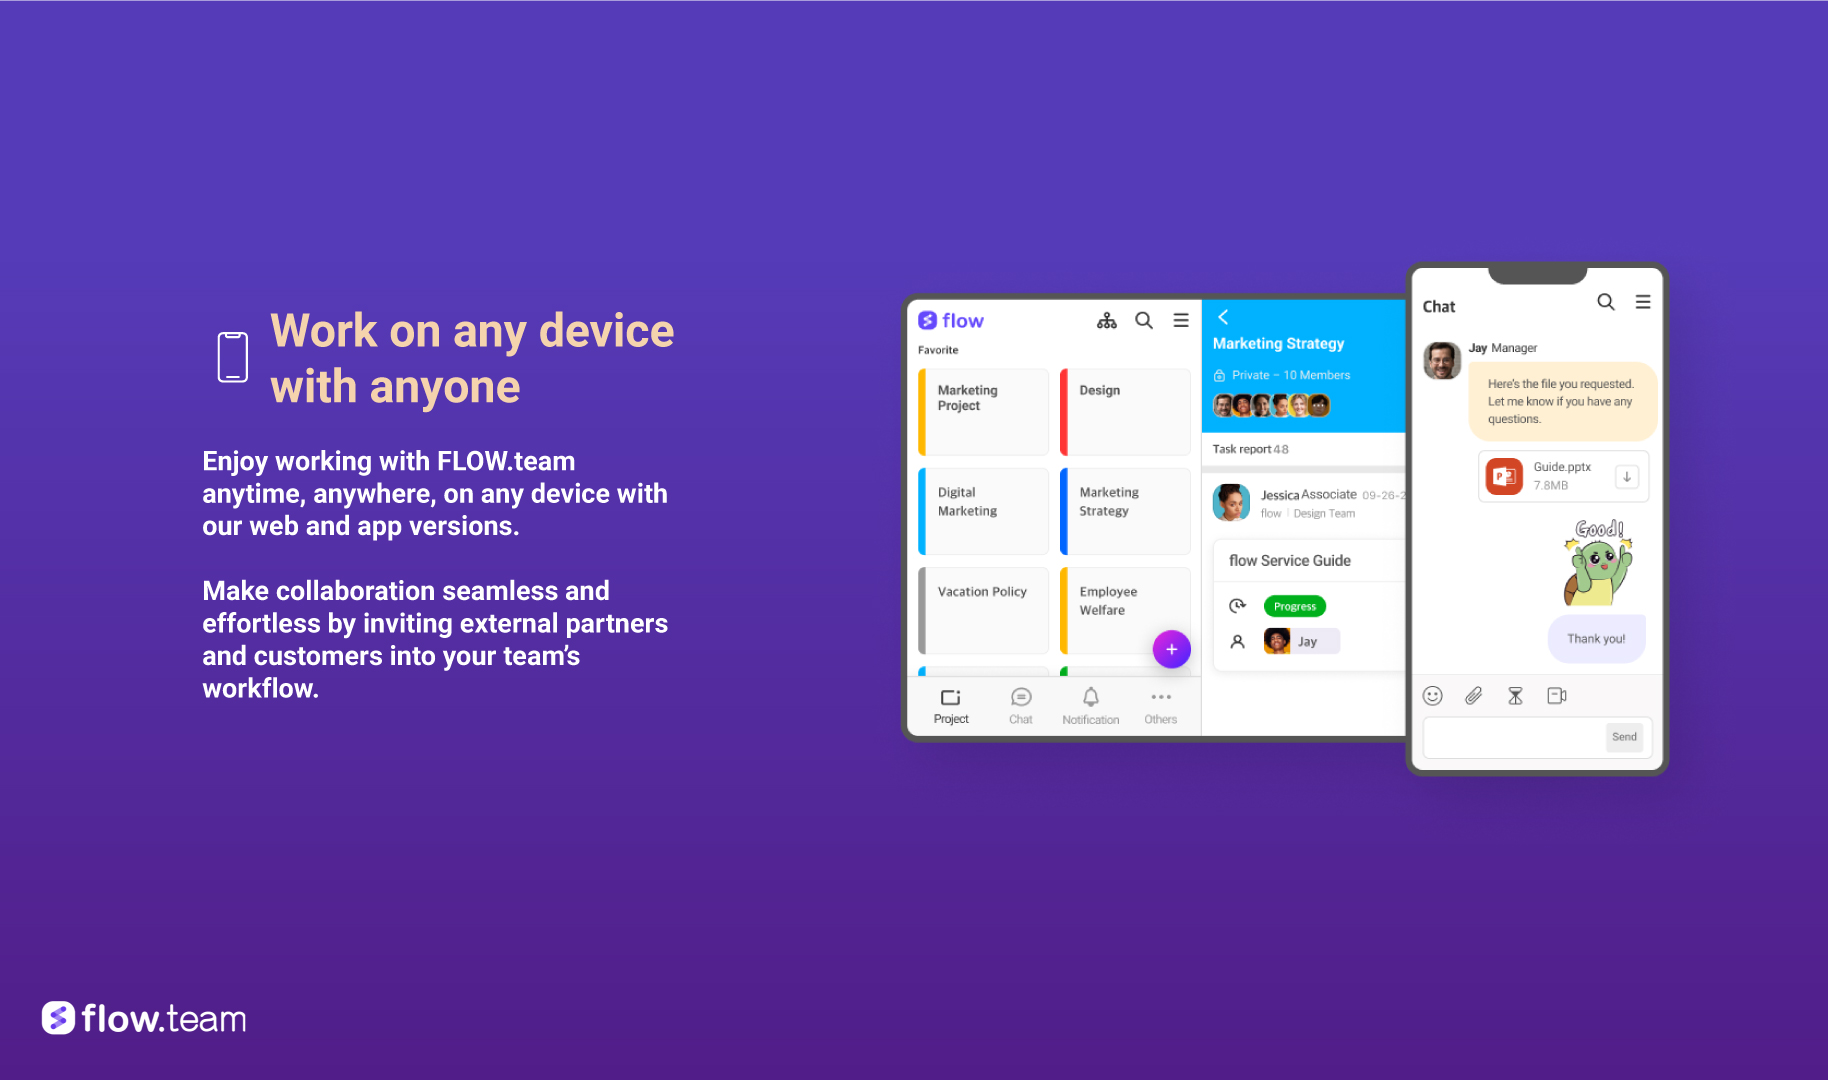 Work on any device with anyone